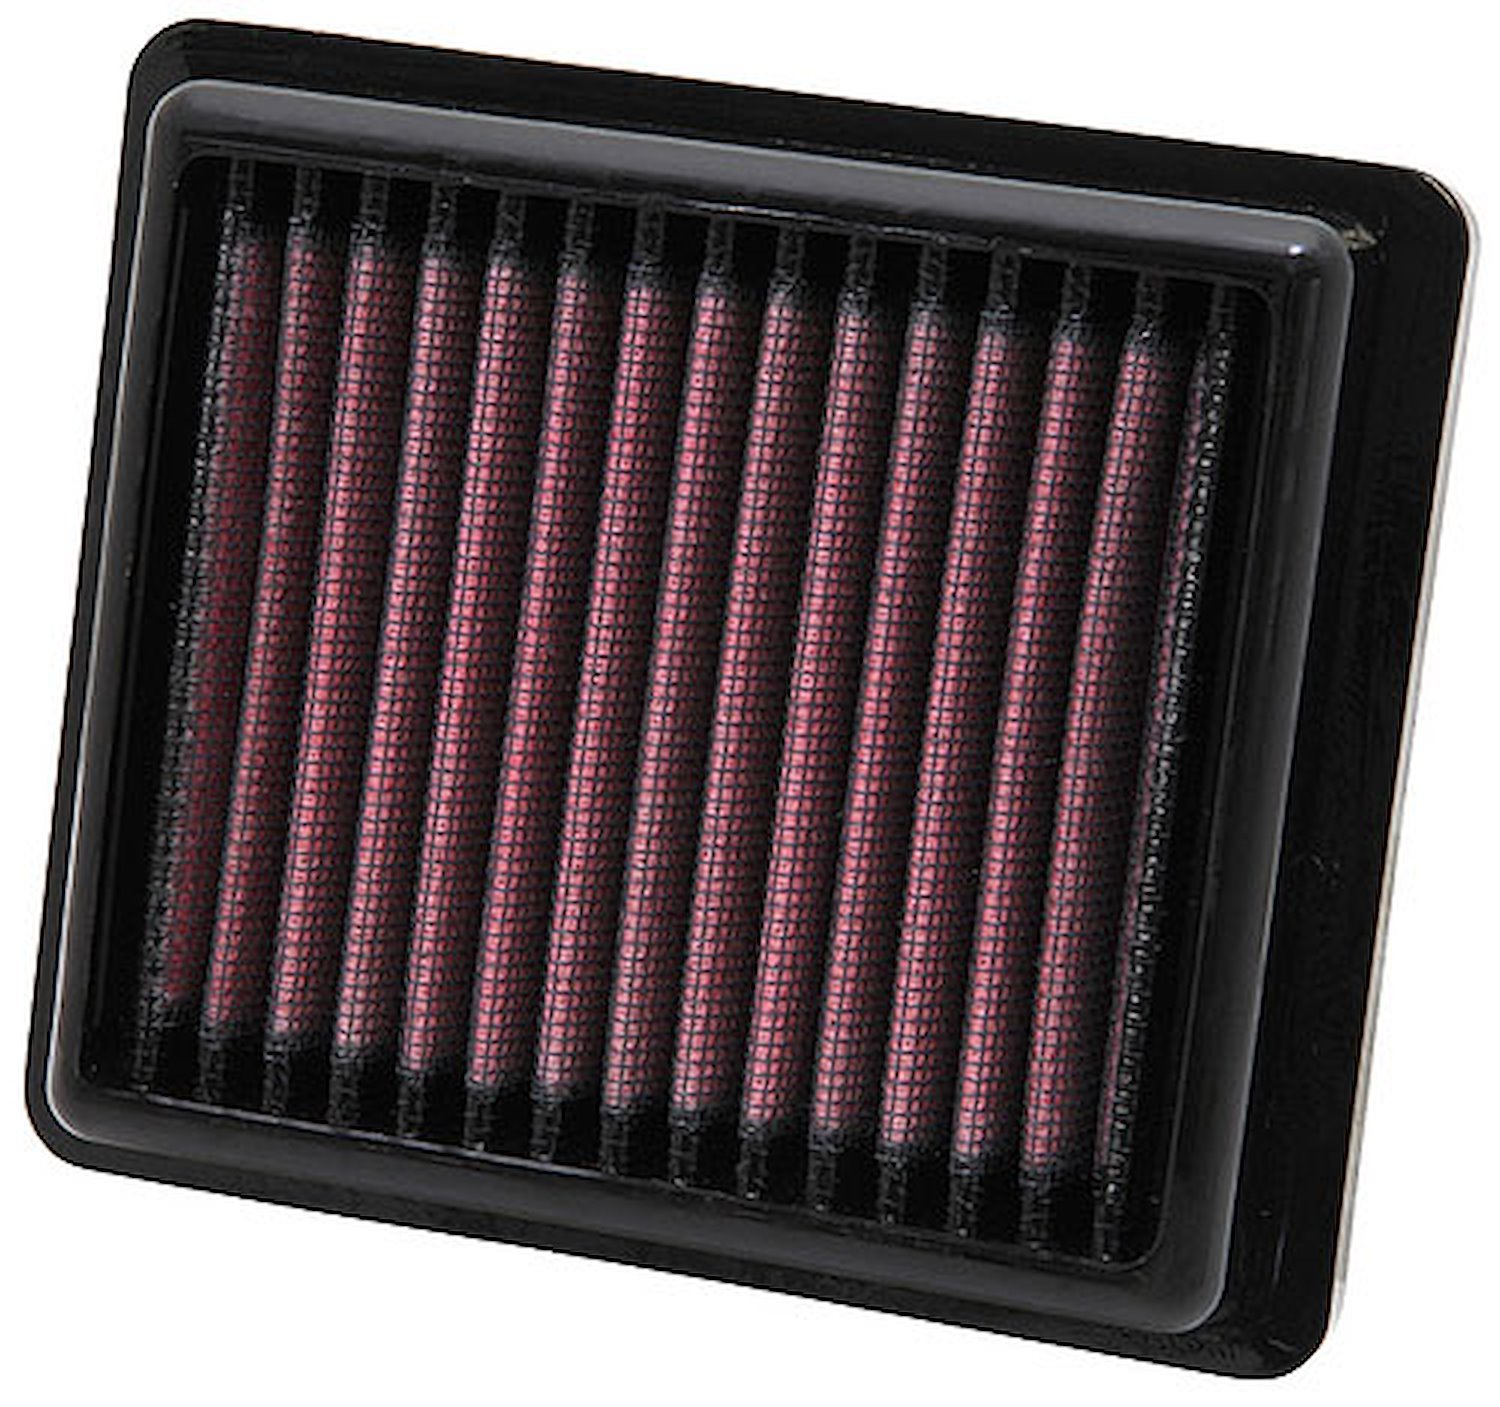 K&N s replacement air filters are designed to increase horsepower and acceleration while providing e